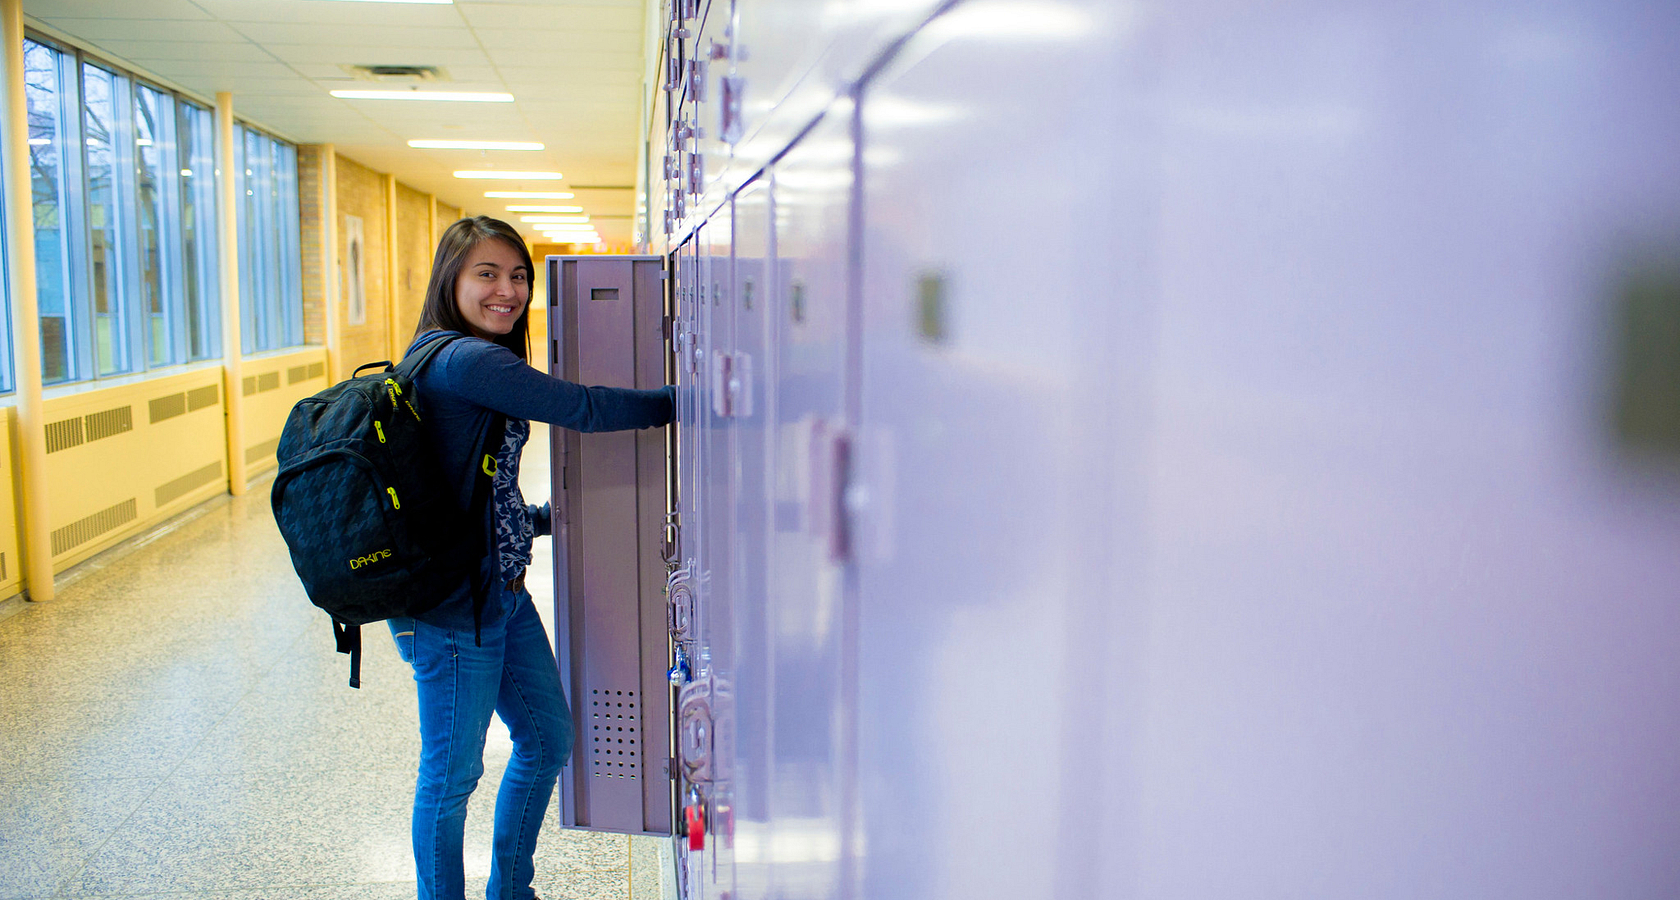 centennial college student smiling while opening their locker